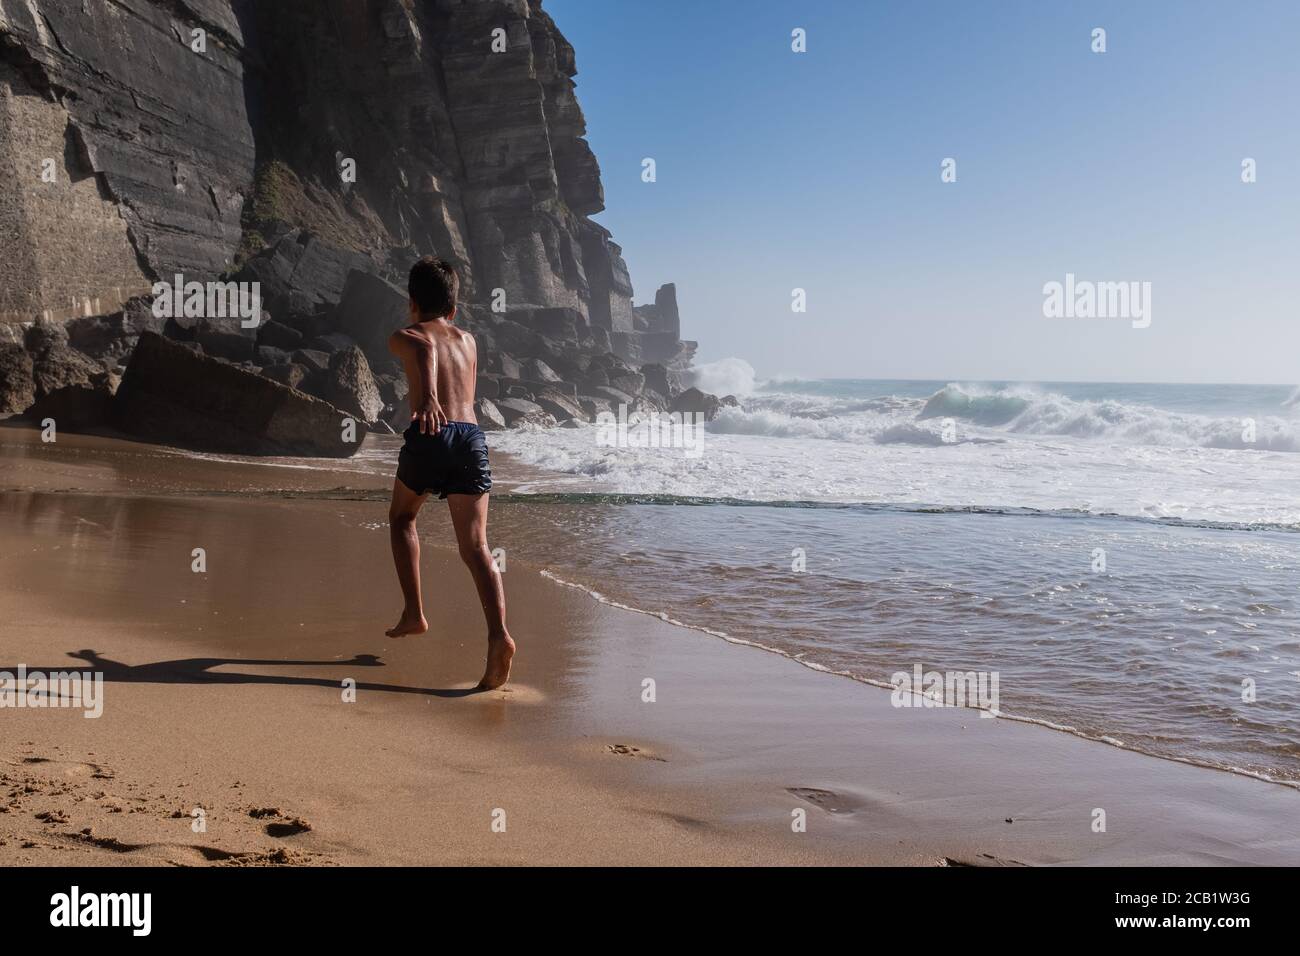 Rear view of boy in blue swim shorts running on sea shore. High cliffs and ocean waves in the background. Active and emotional holiday concept. Stock Photo